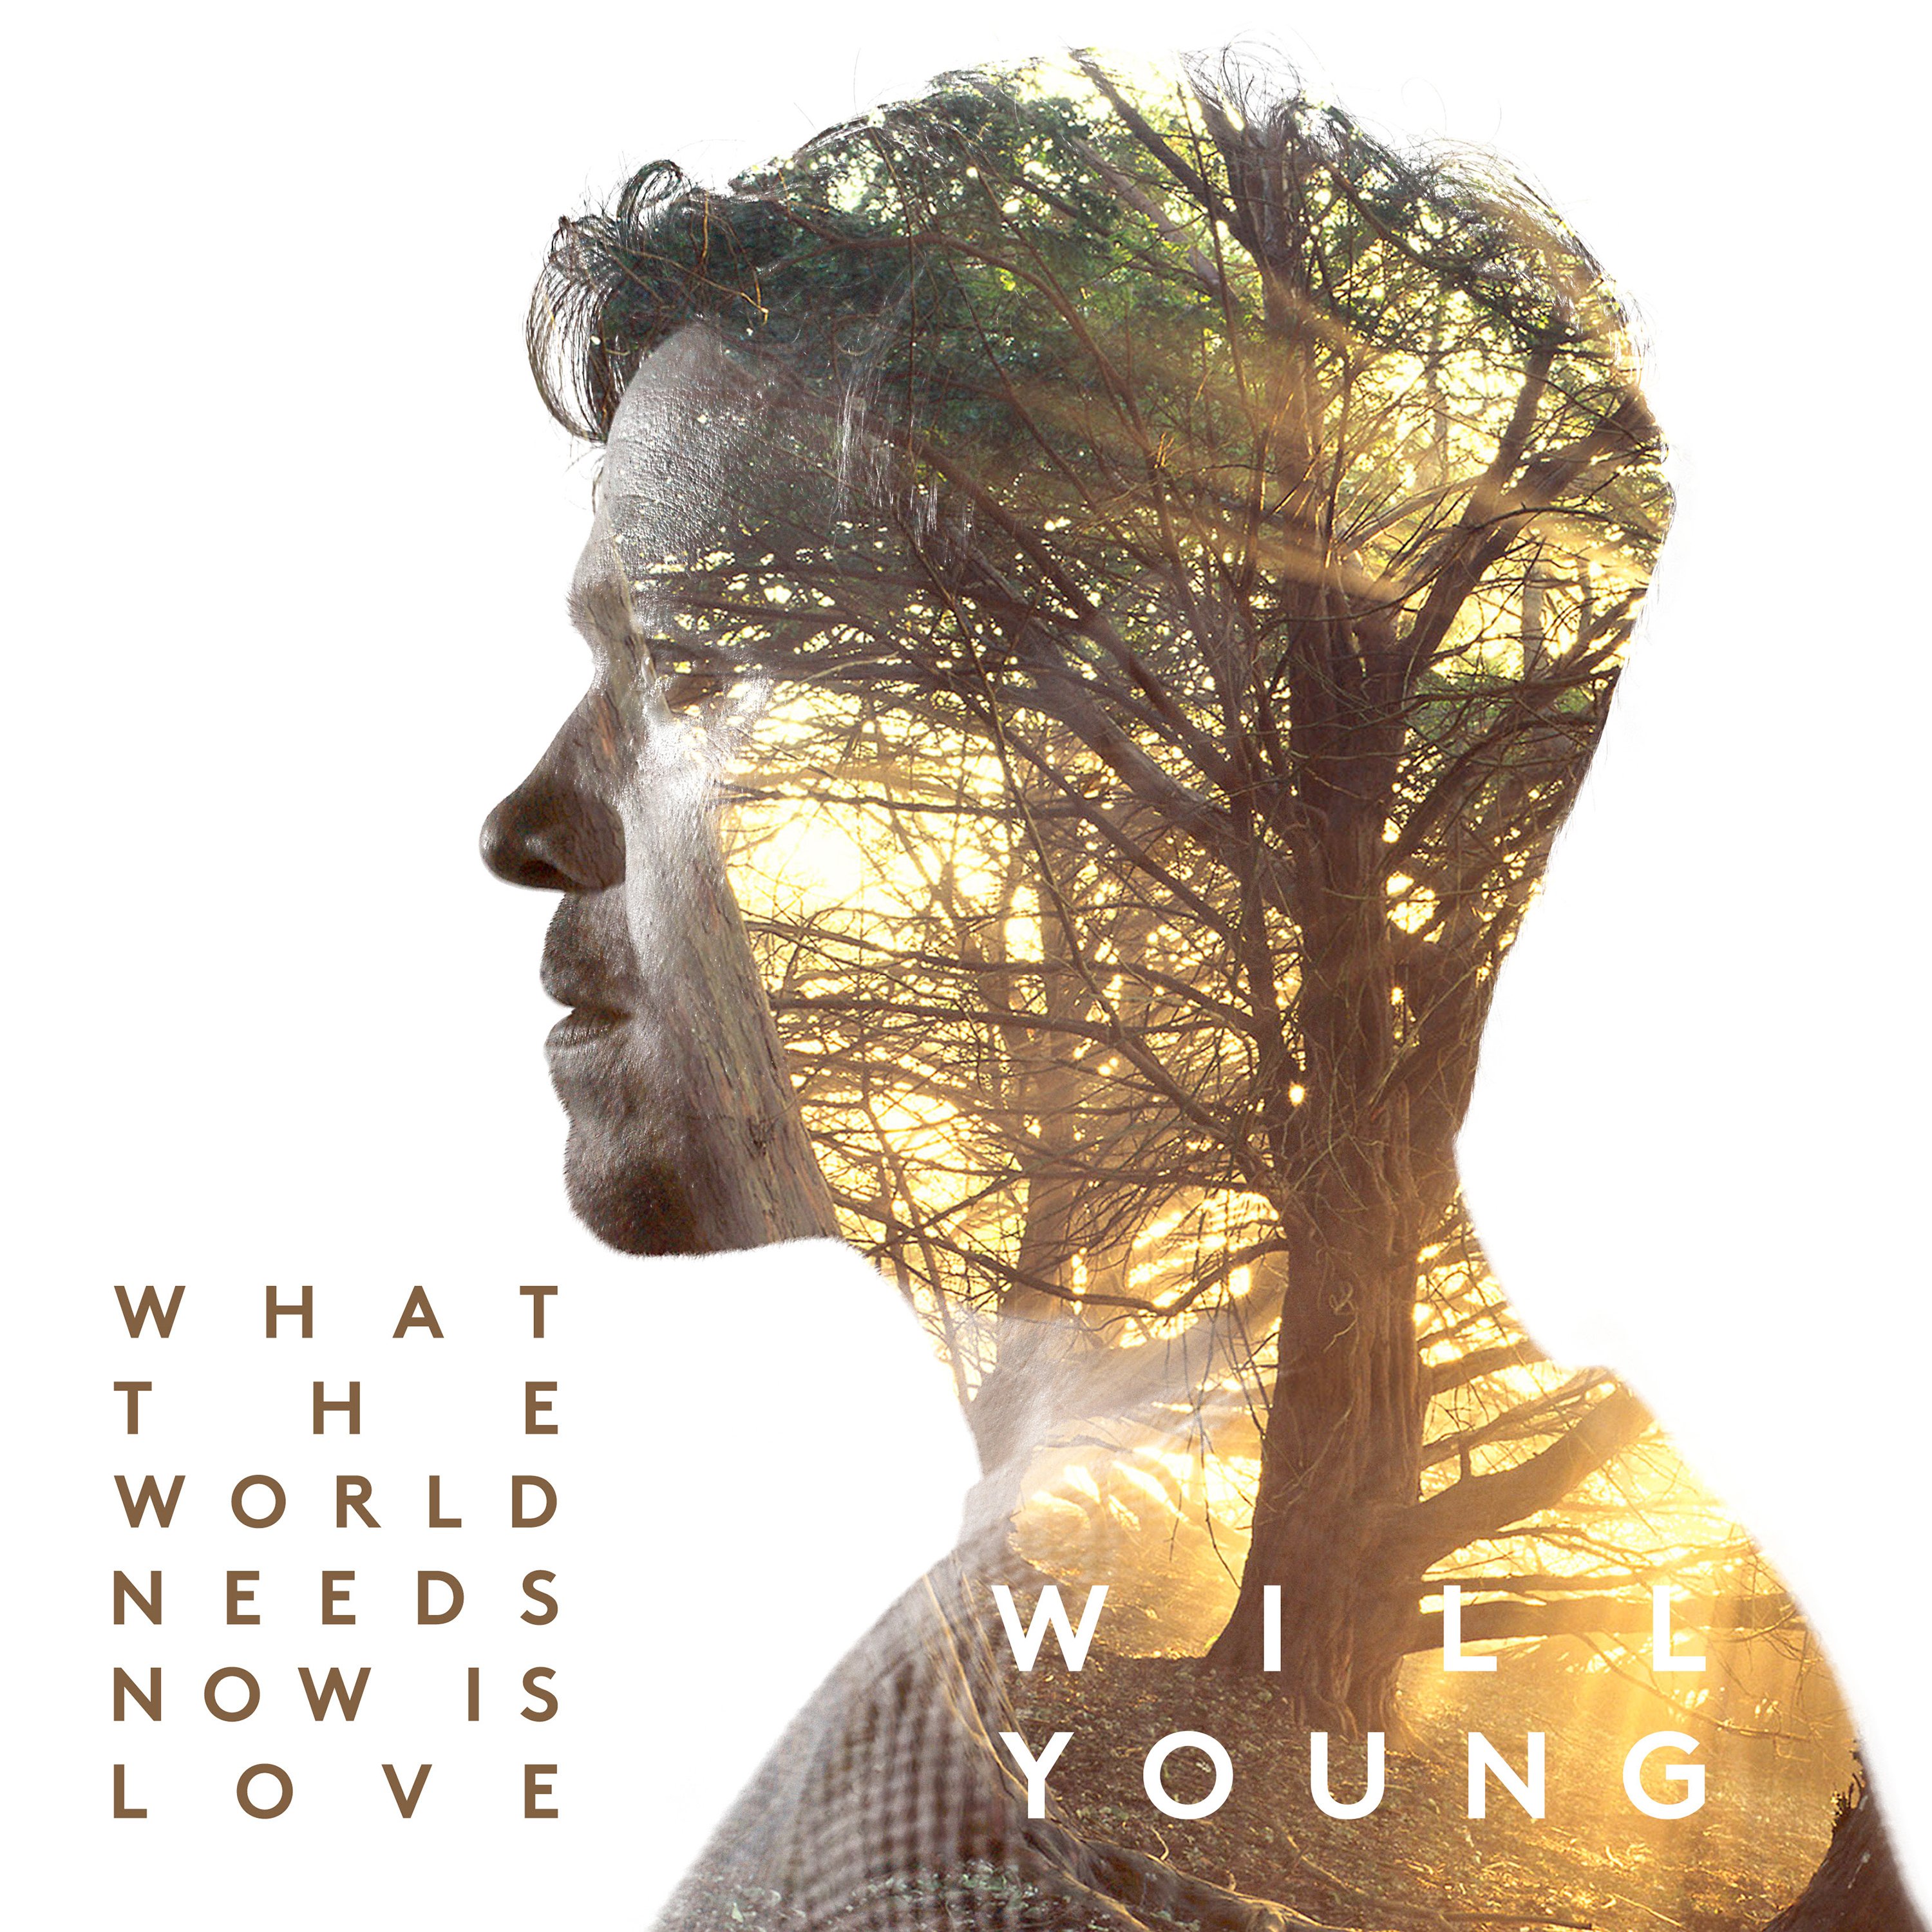 Needs now is love. Will young обложки альбомы. What the World needs Now is Love. Will young - what the World needs Now is Love. What the World needs Now (is Love) саундтрек.